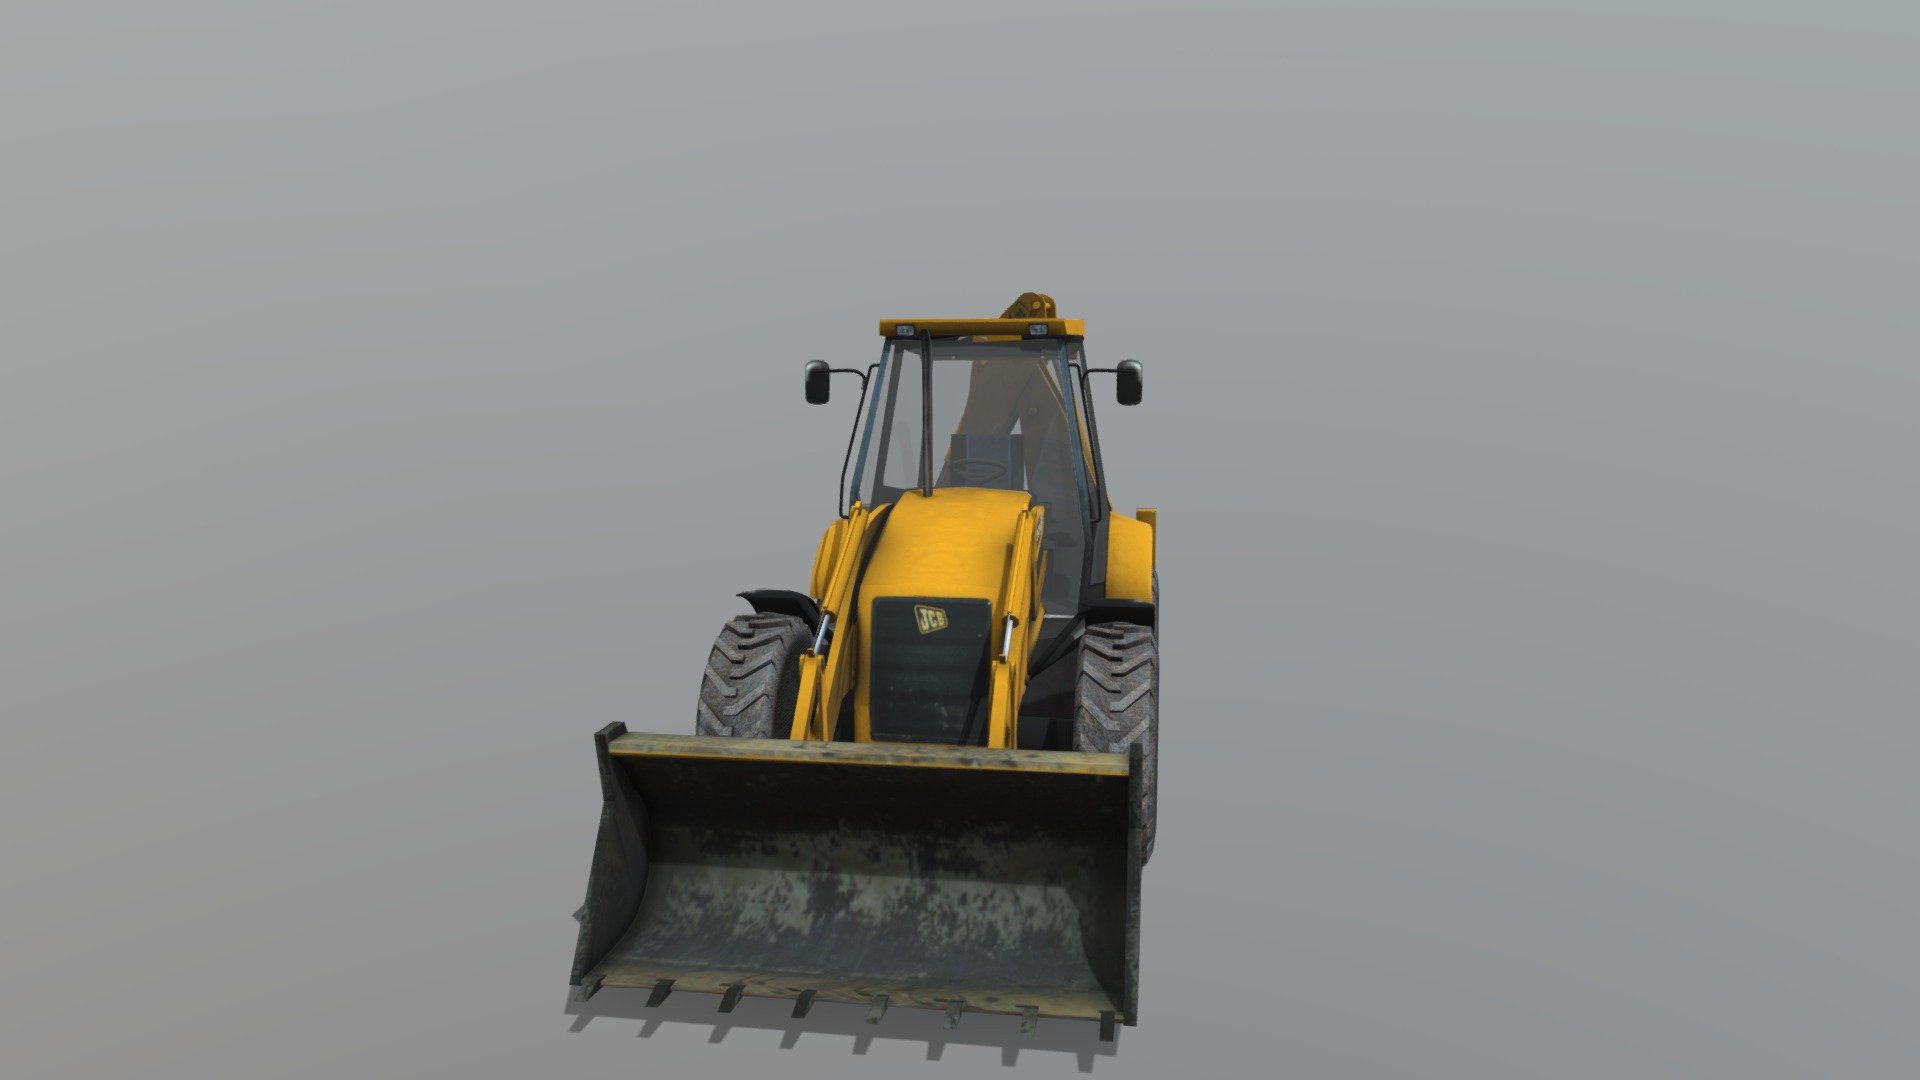 Construction Backhoe my son and I made together. The Model was made in 3DS Max, we used Substance and Photoshop. 2 textures, 1024 x 1024 for base color and 256 x 256 for wheels and Alpha. Model is about 6.5K Ploygons 3d model